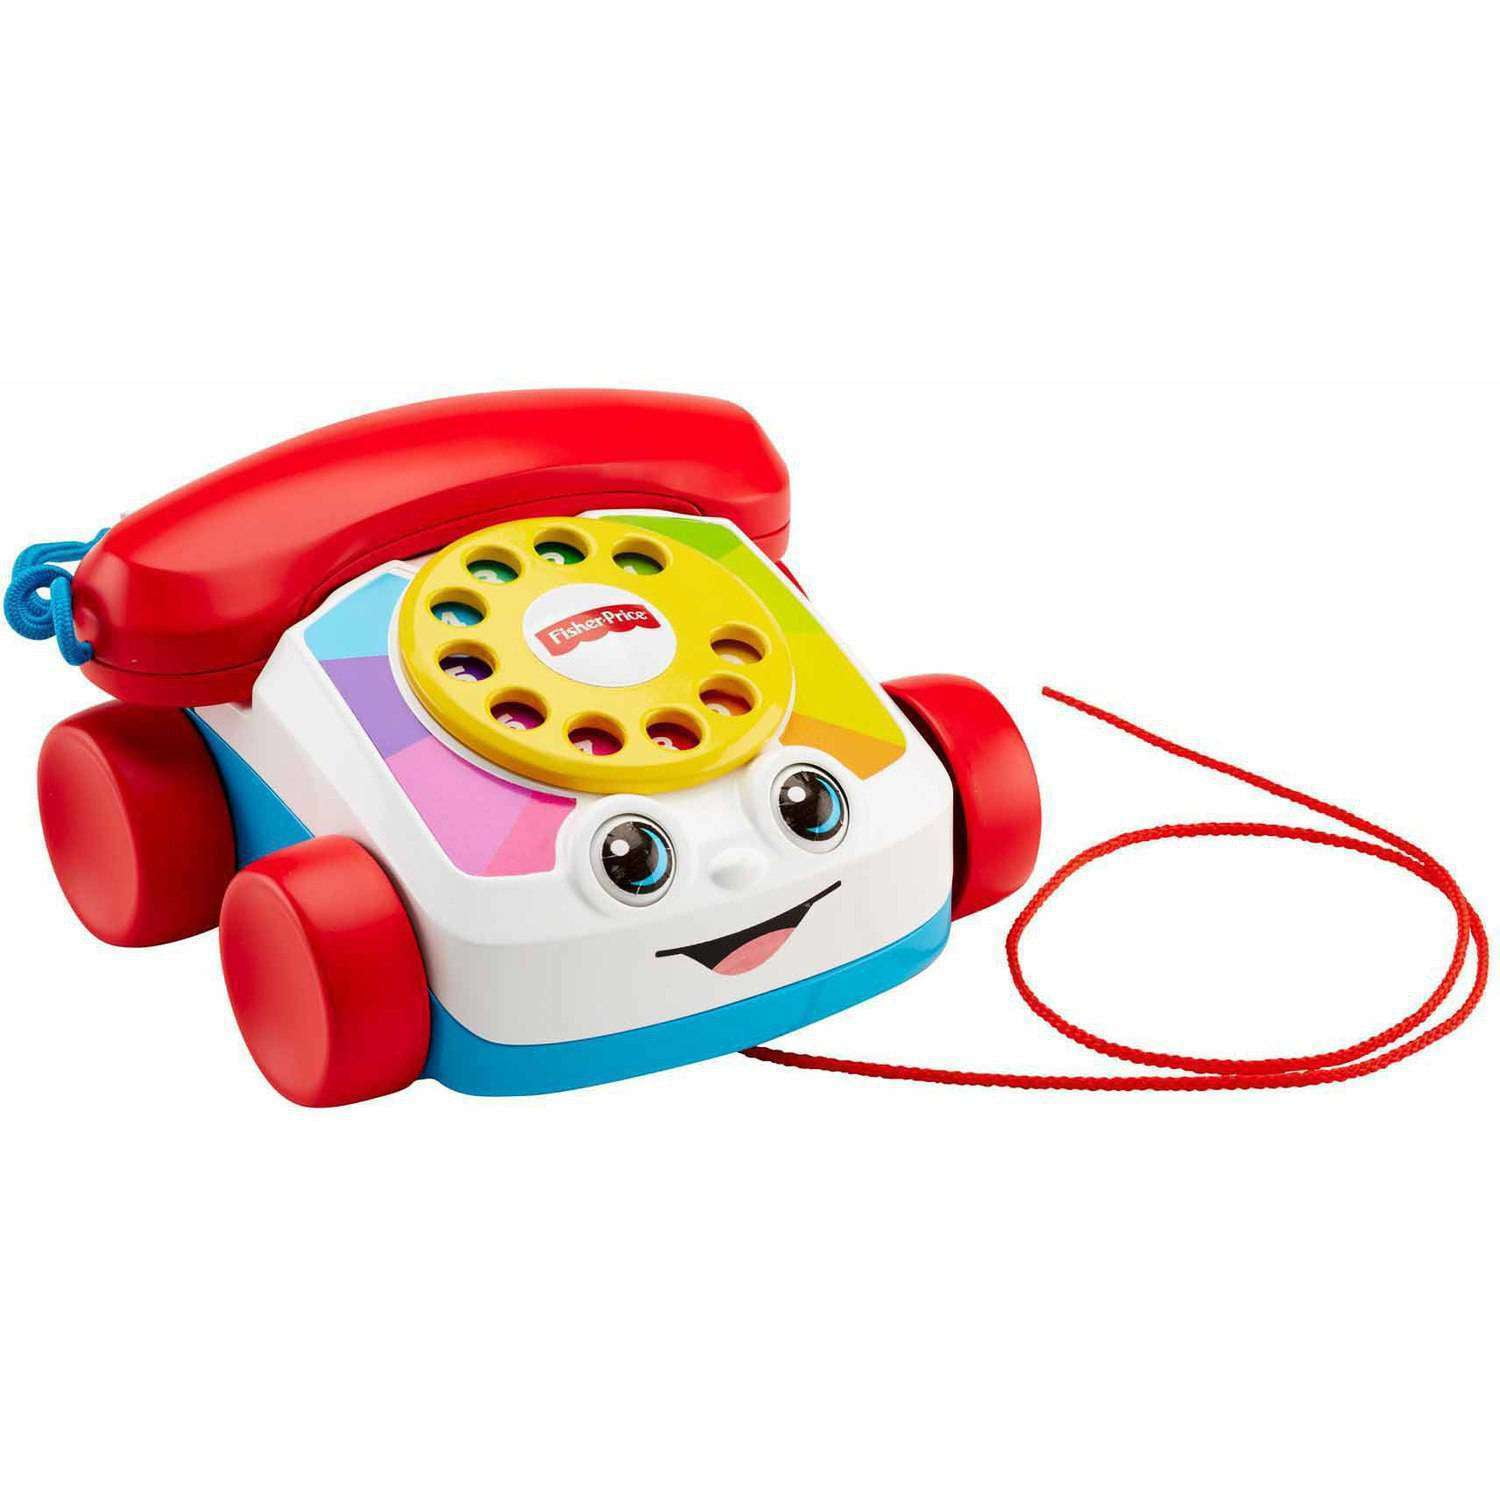 Fisher-Price Classic Chatter Phone for sale online 